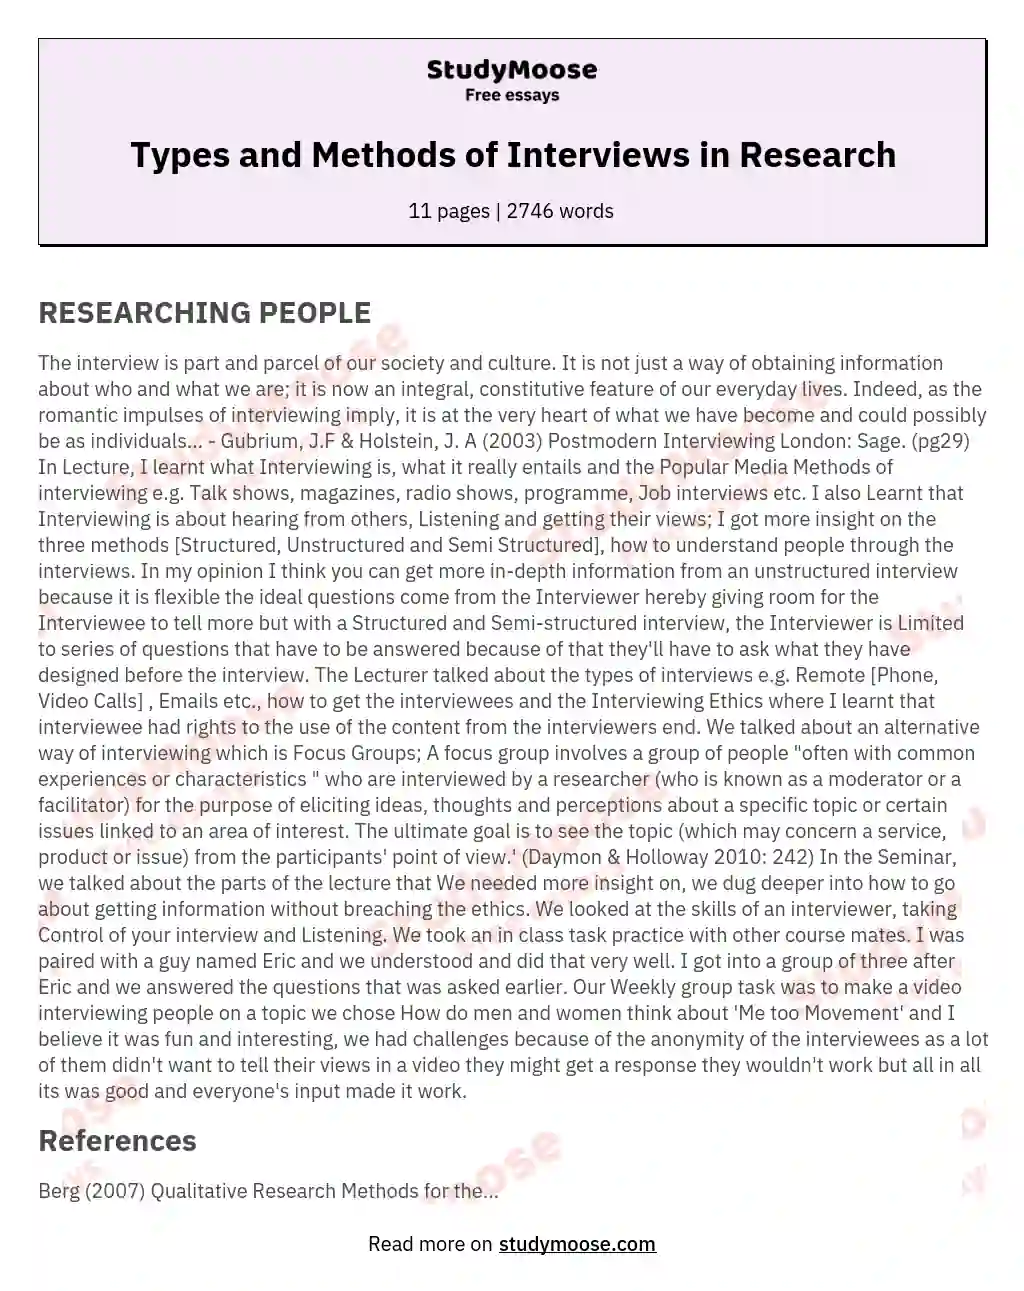 Types and Methods of Interviews in Research essay